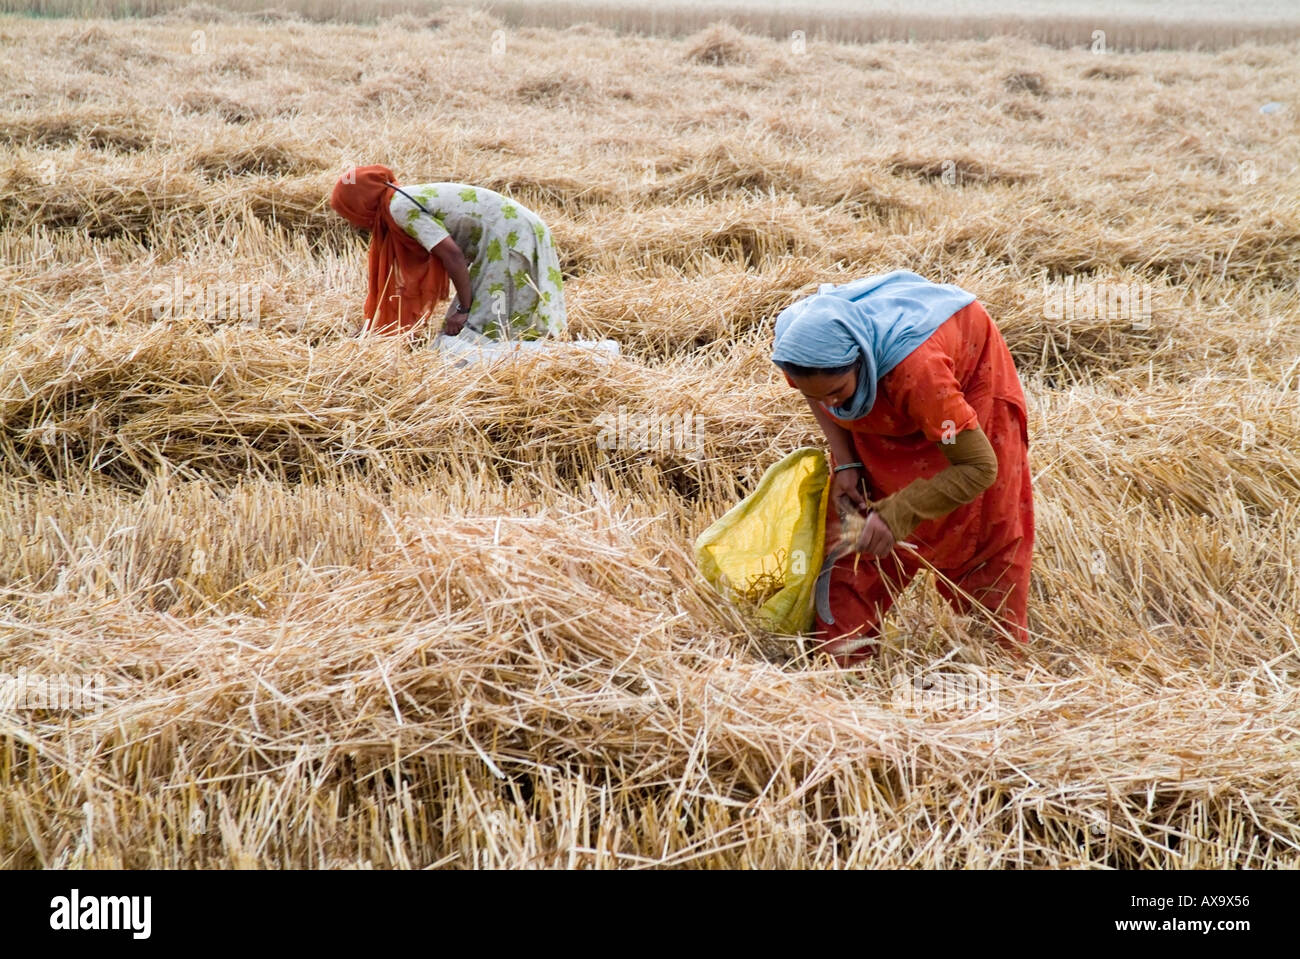 Poor women gathering remains after farmer has harvested his crop of wheat Stock Photo